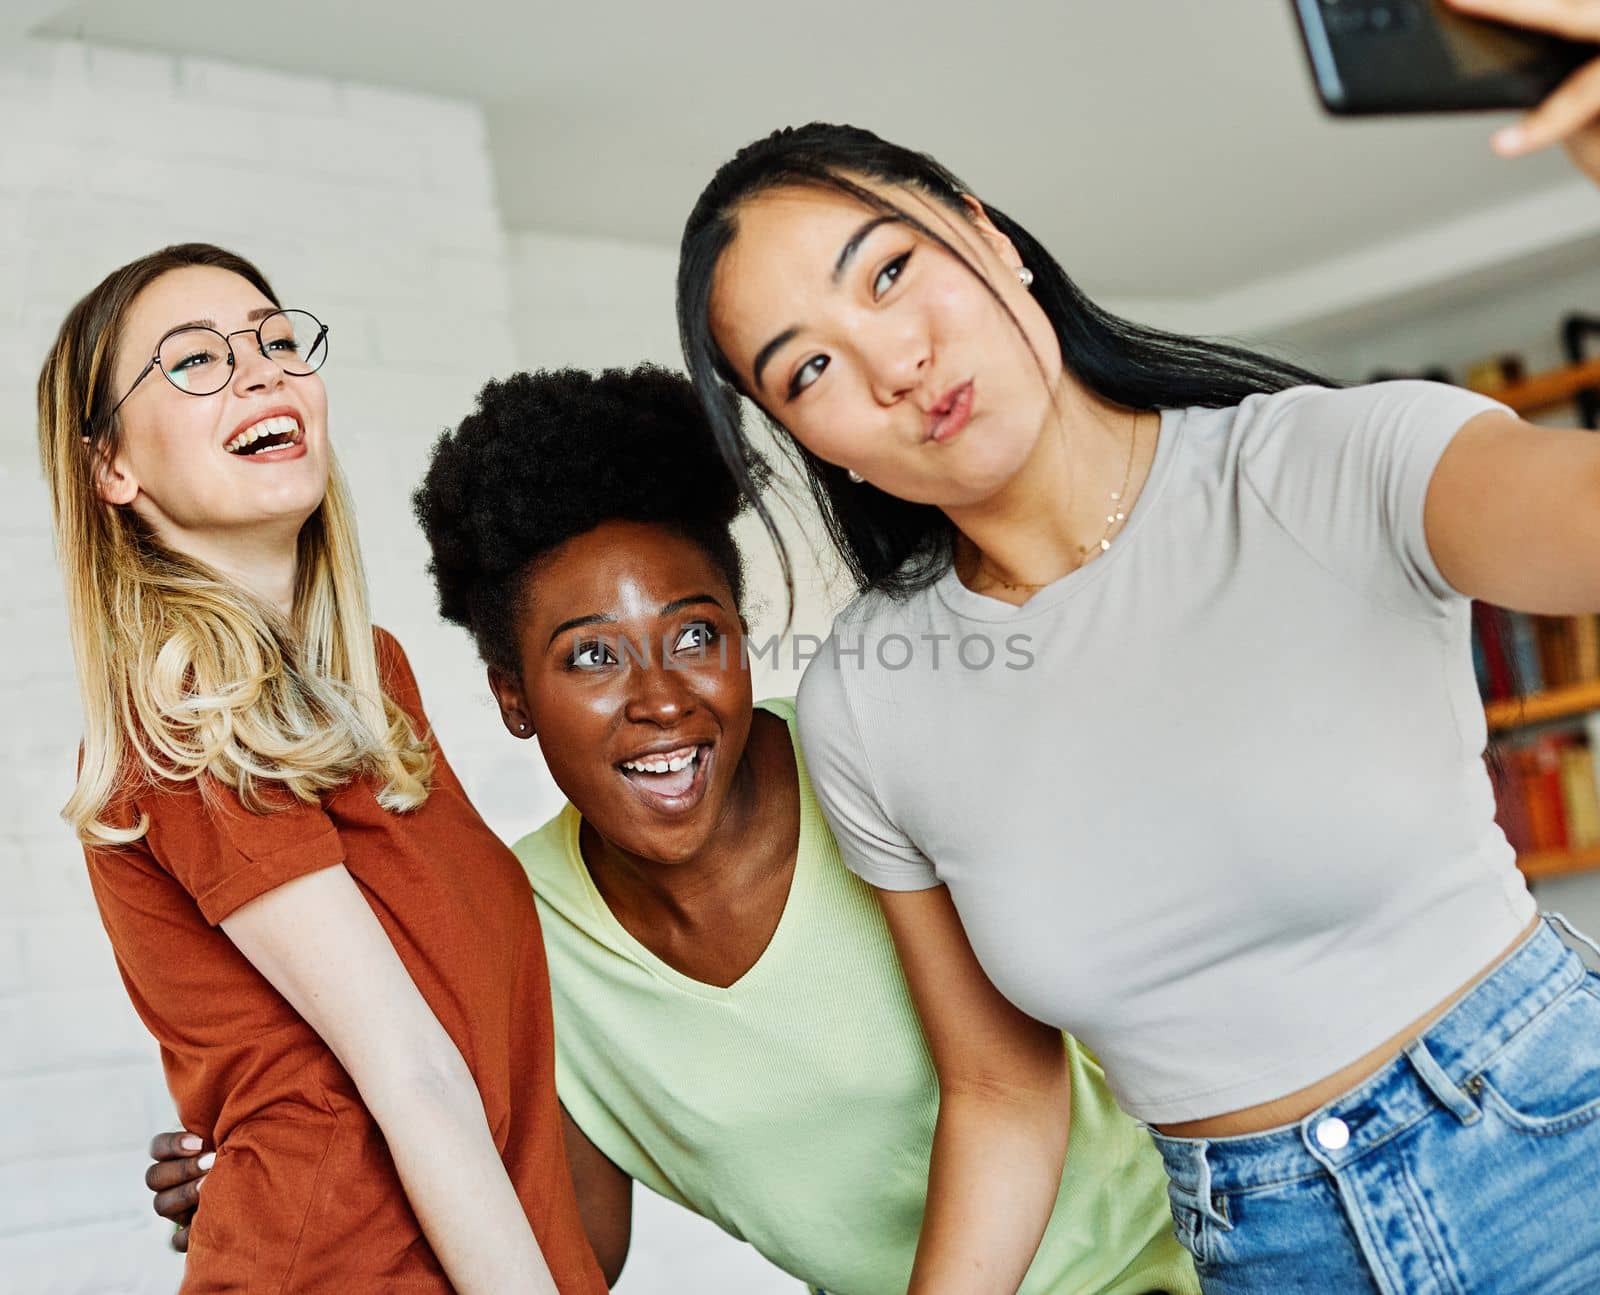 Happy young girls of diverse ethnicity having fun together taking selfie